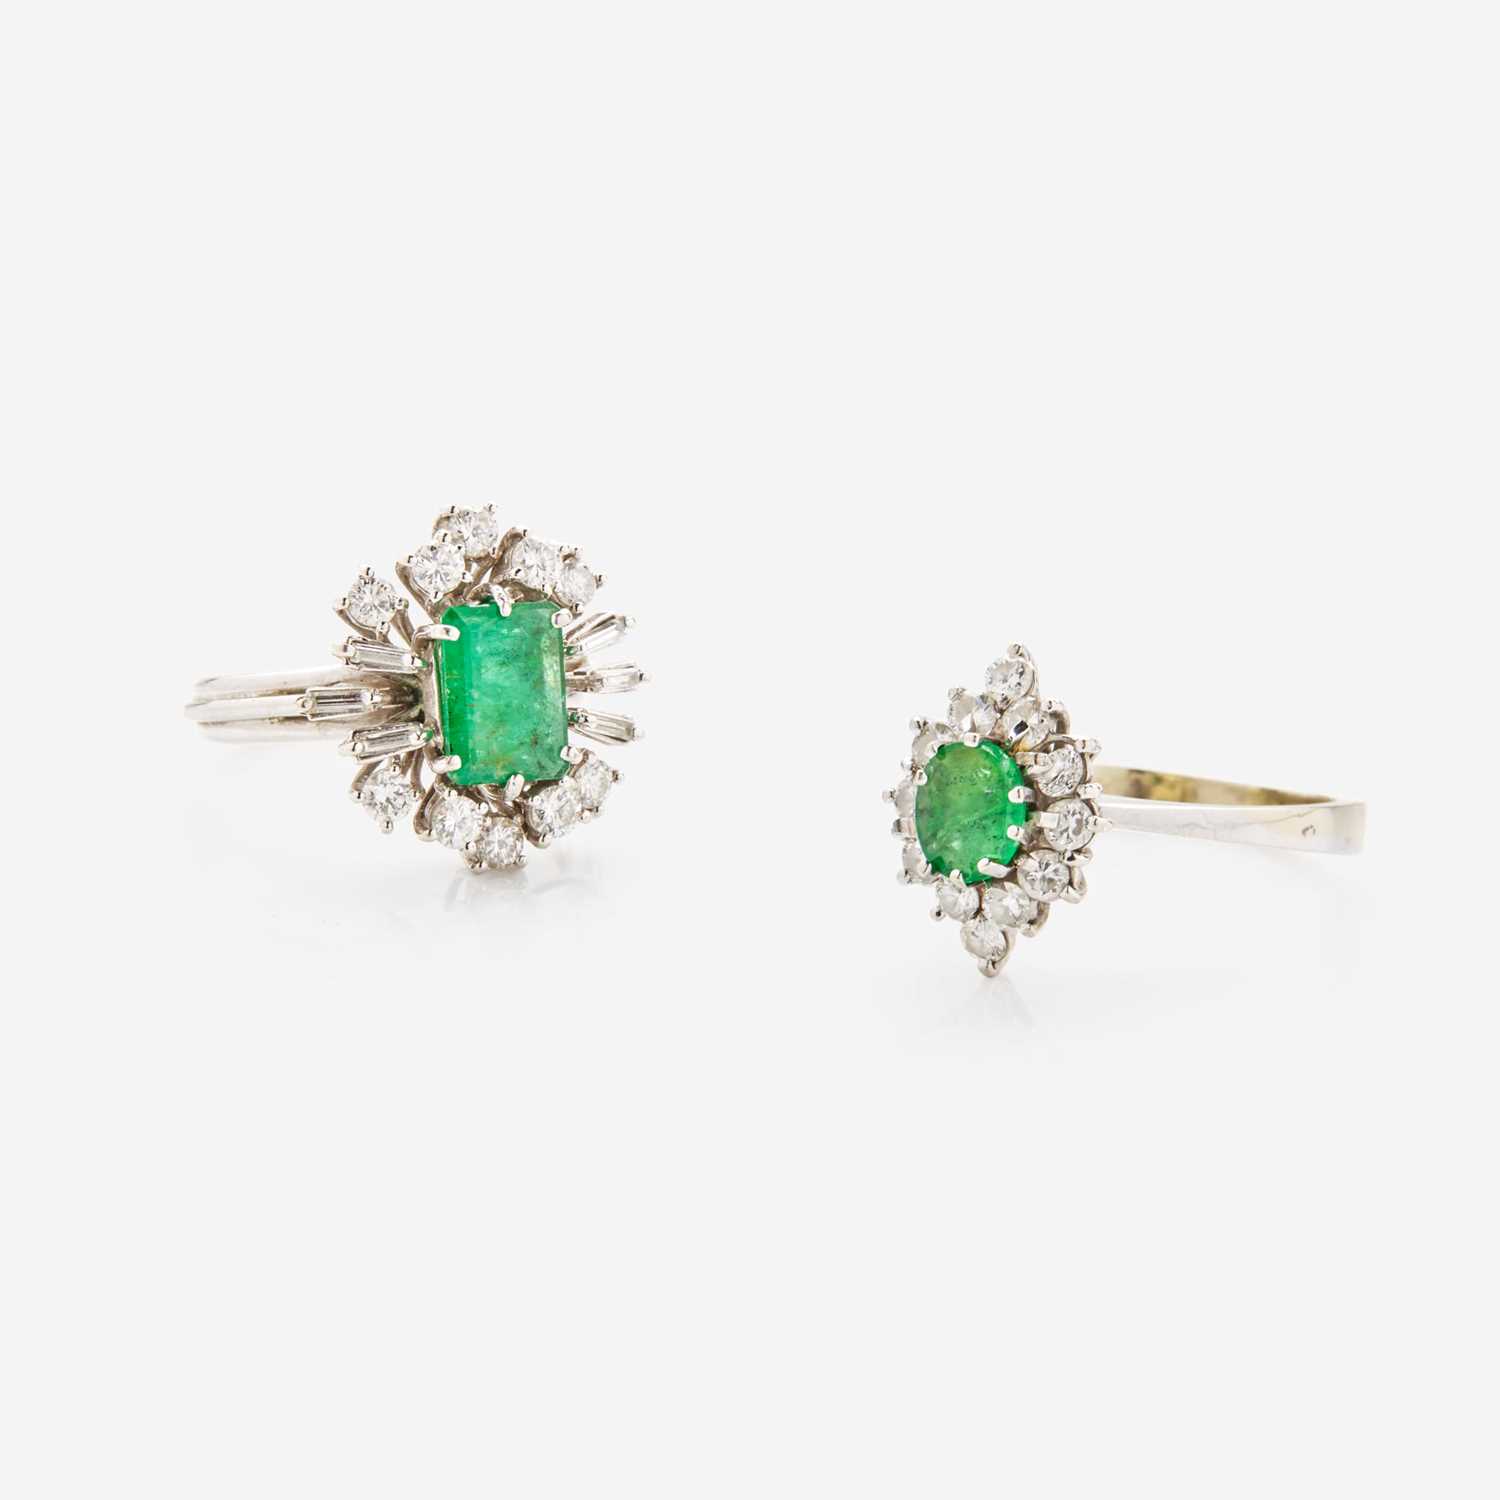 Lot 66 - A Set of Two 14K Gold, Diamond, and Emerald Rings